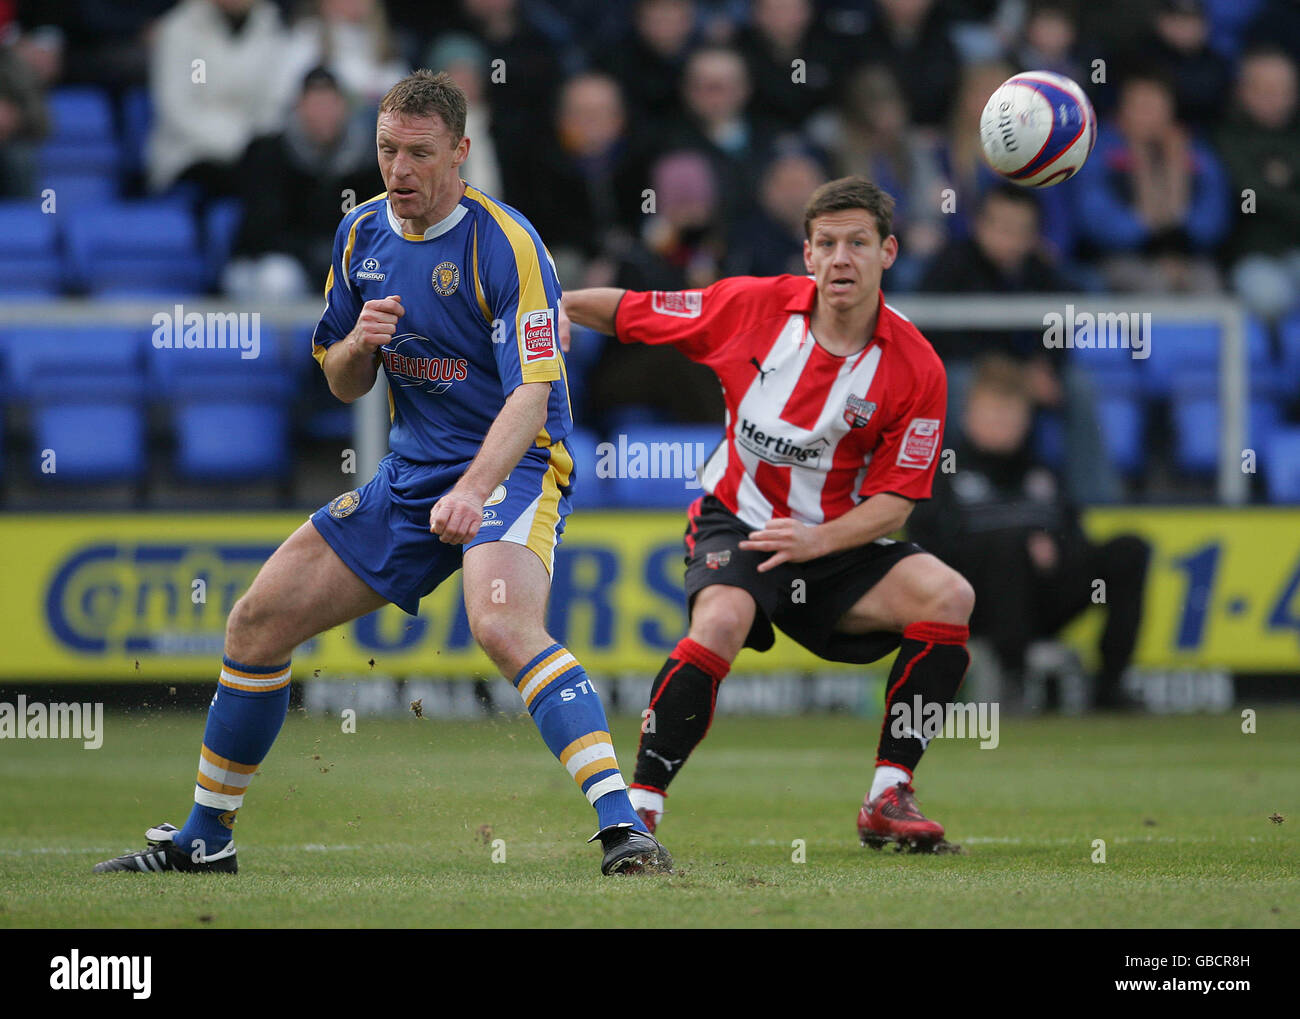 Brentford's Mark Phillips and Shrewsbury Town's James Constable during the Coca-Cola League Two match at the Prostar Stadium, Shrewsbury. Stock Photo